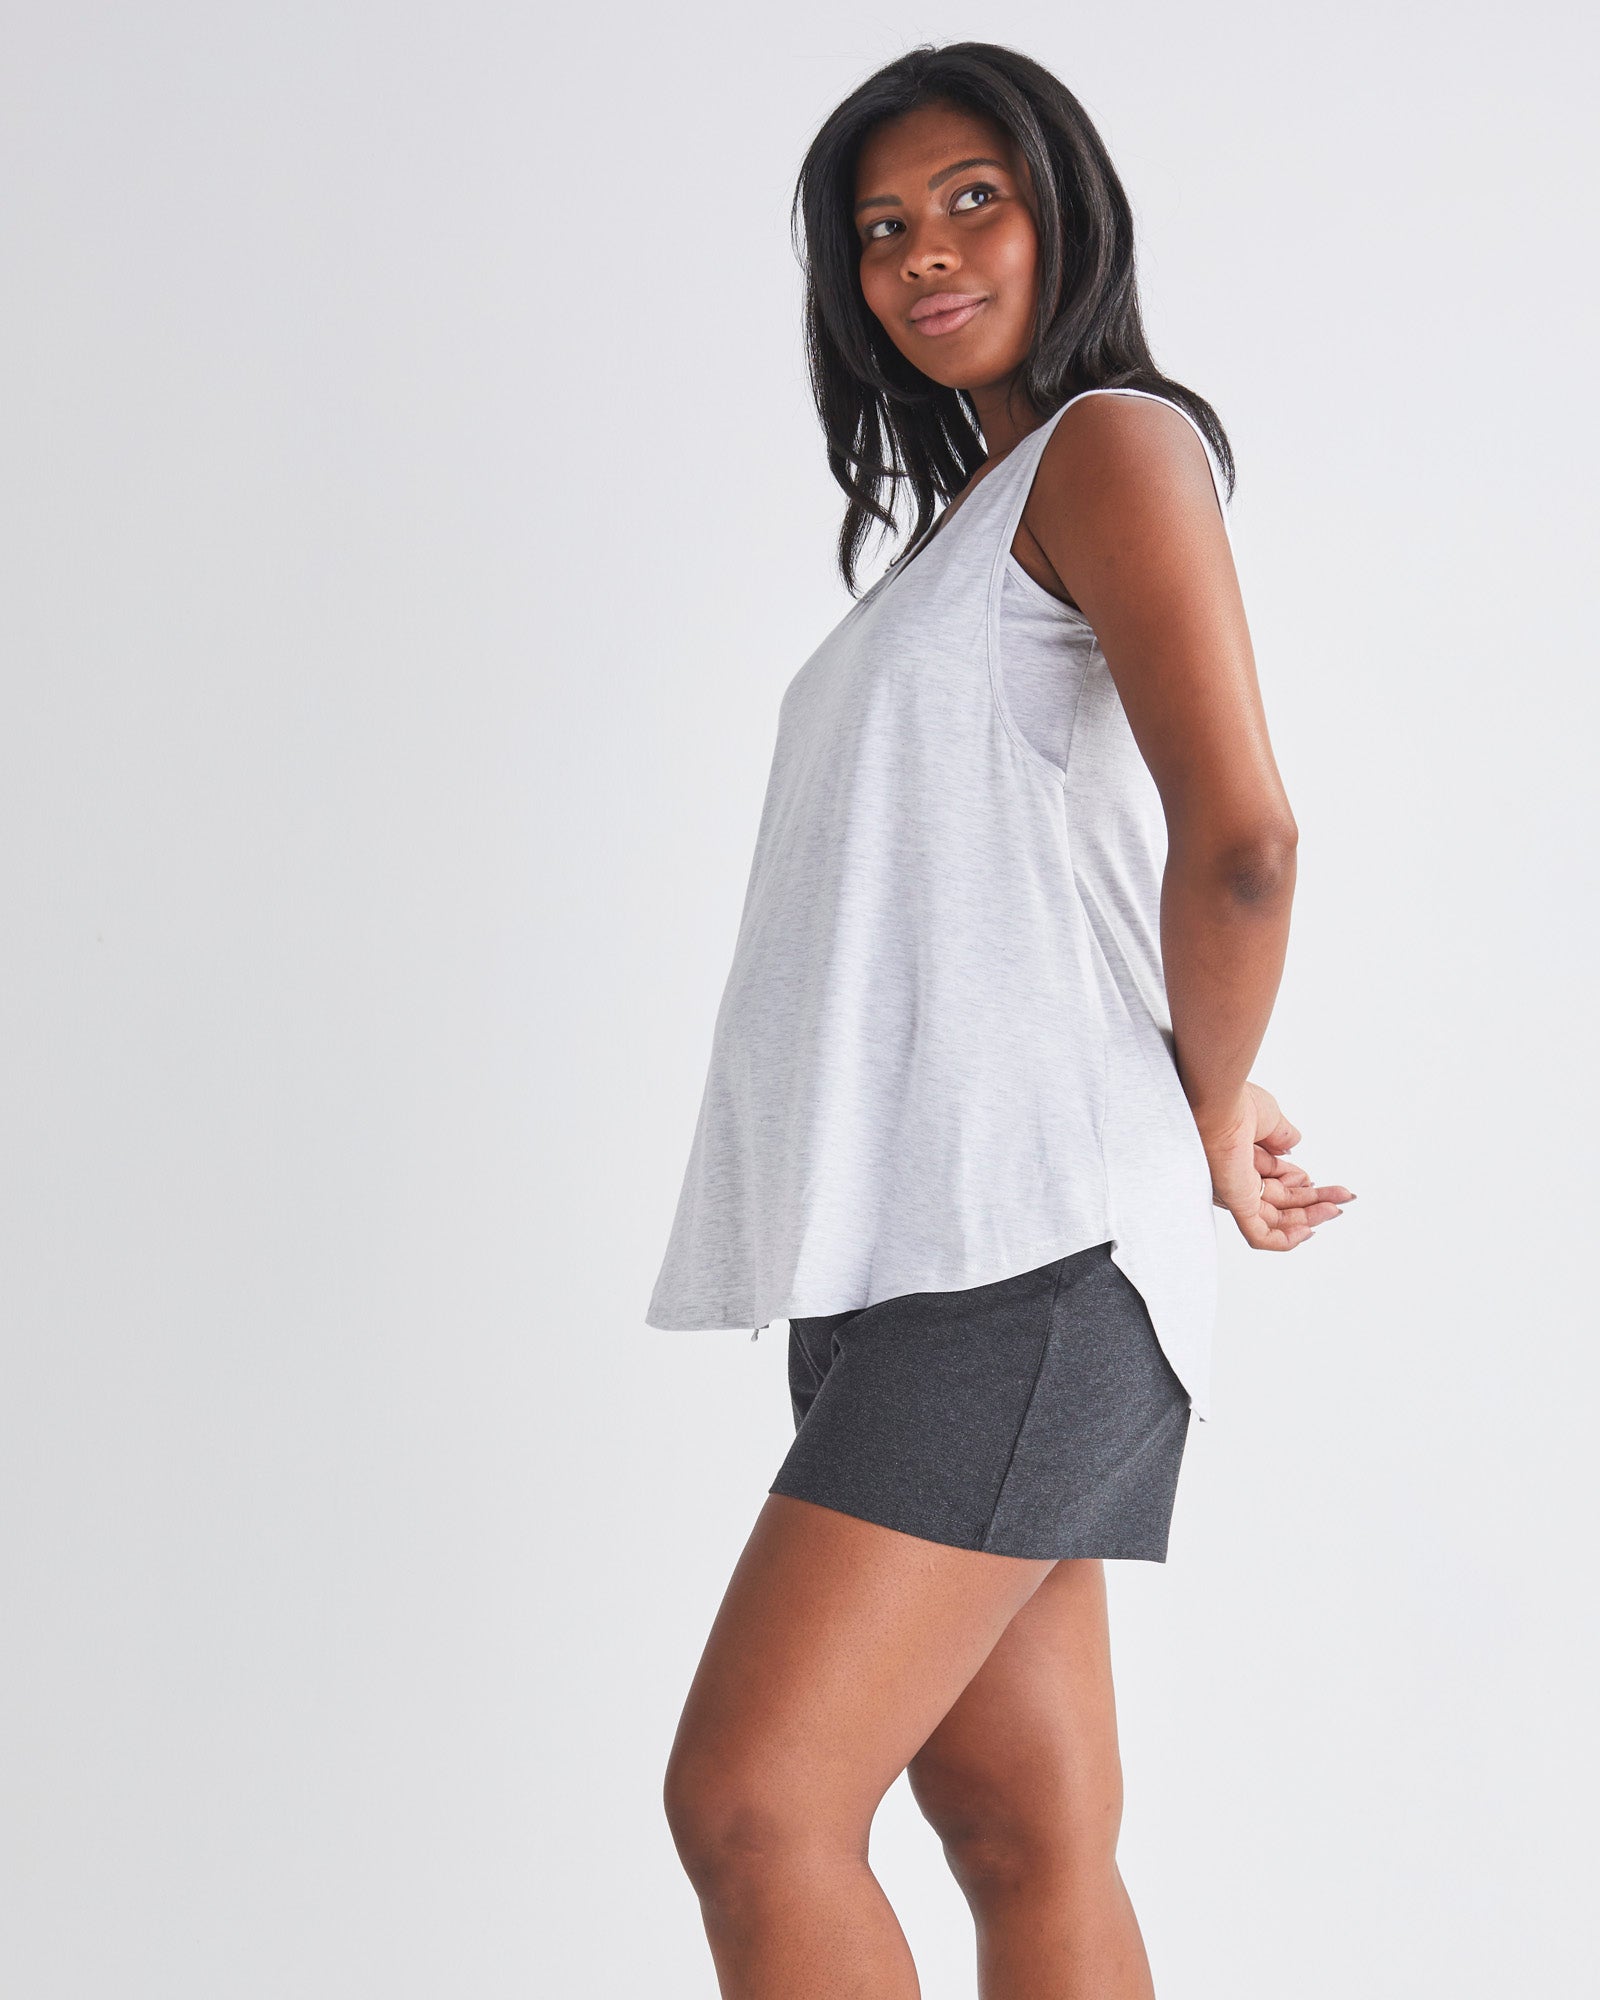 Side View - A Pregnannt Woman Wearing 2-piece Maternity/Nursing Pyjama Set - Top & Shorts from Angel Maternity.